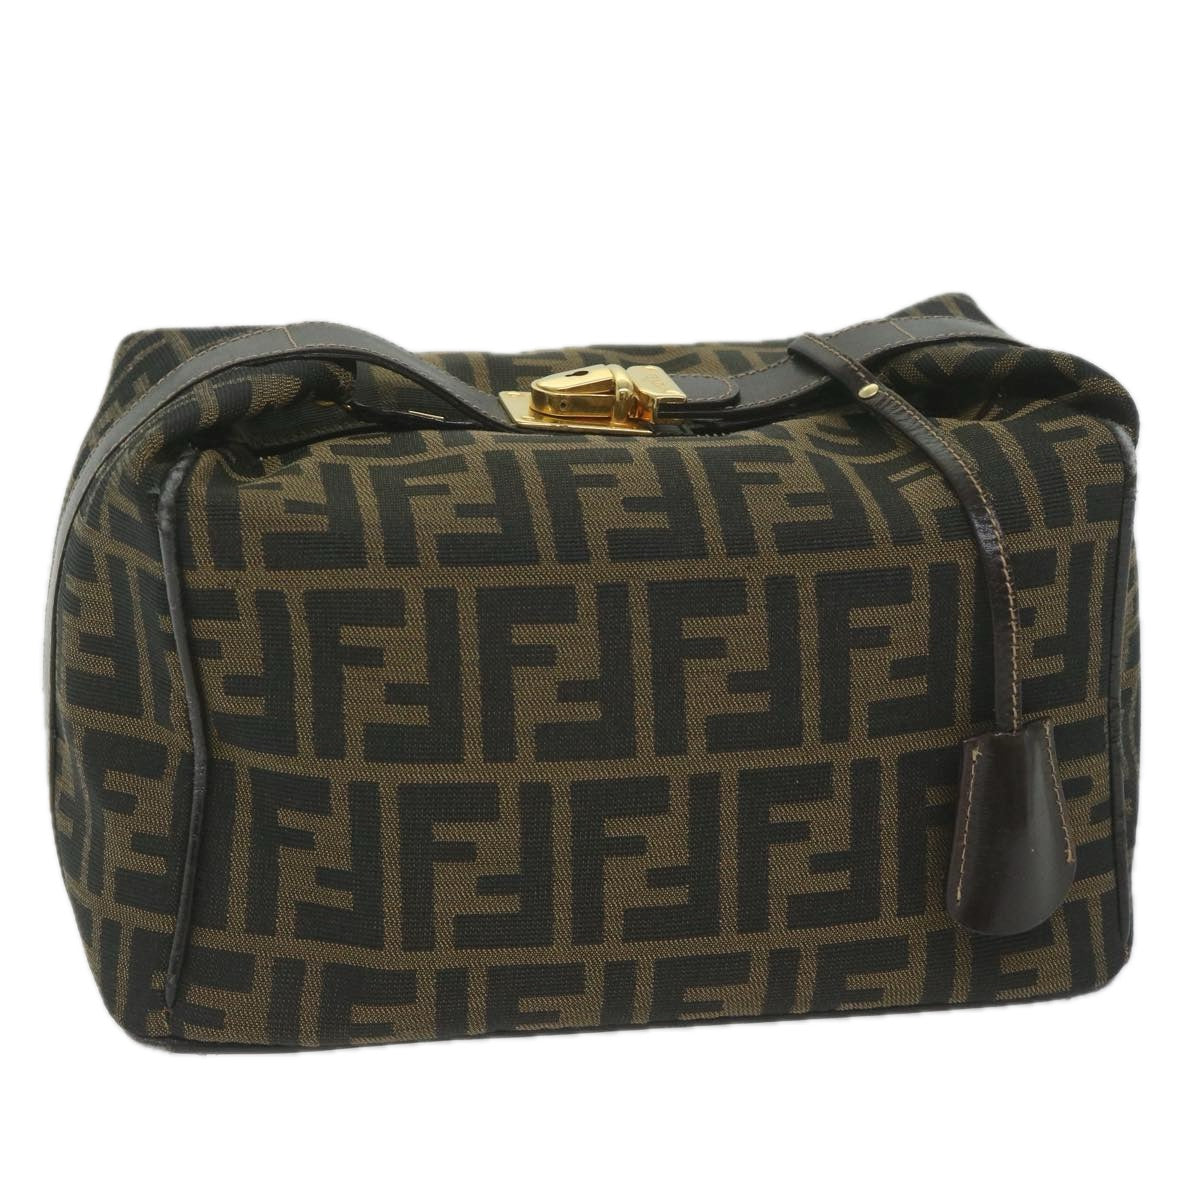 FENDI Zucca Canvas Vanity Cosmetic Pouch Black Brown Auth 61796